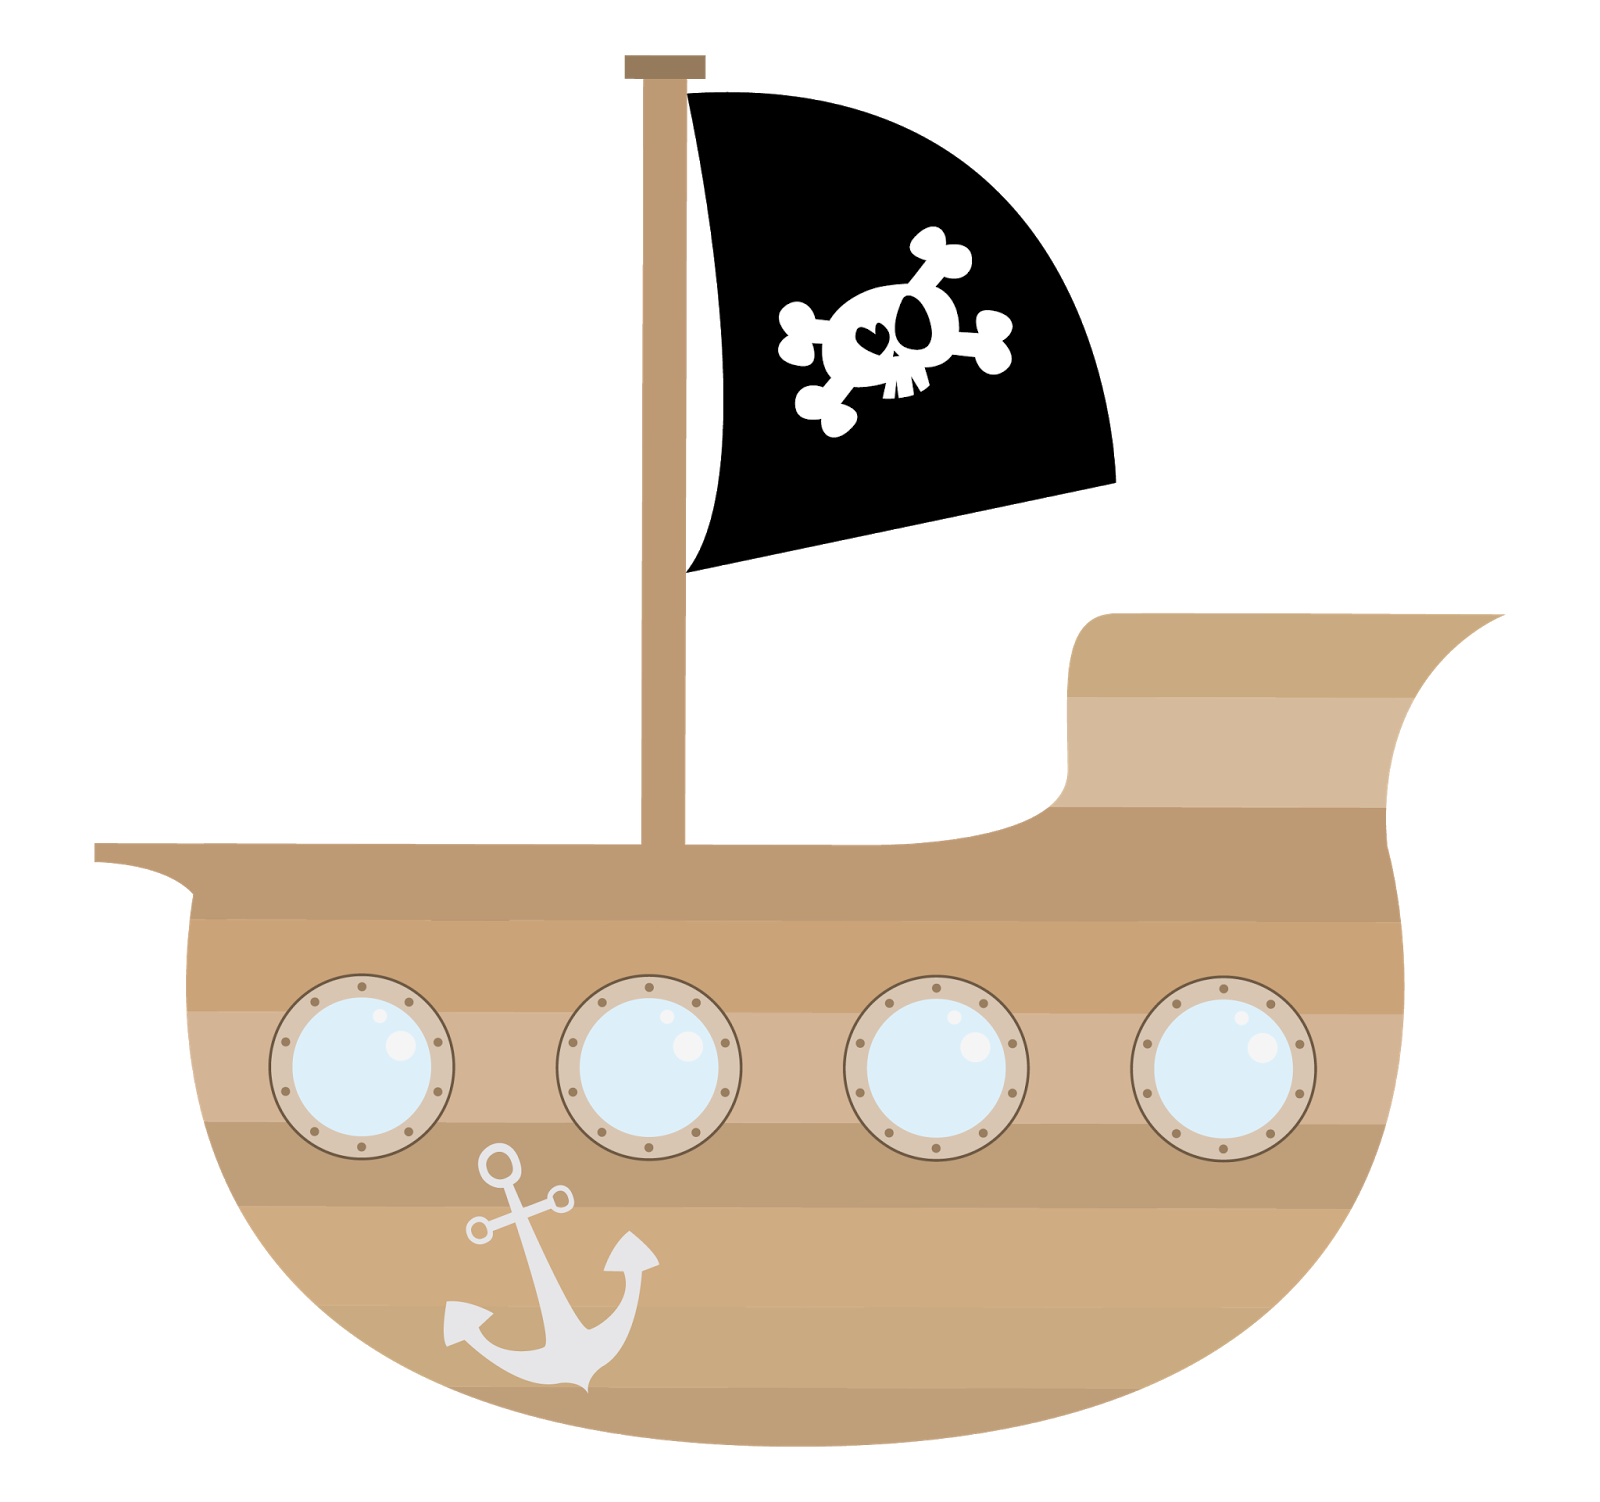 Pirate ship clipart 2 » Clipart Station.